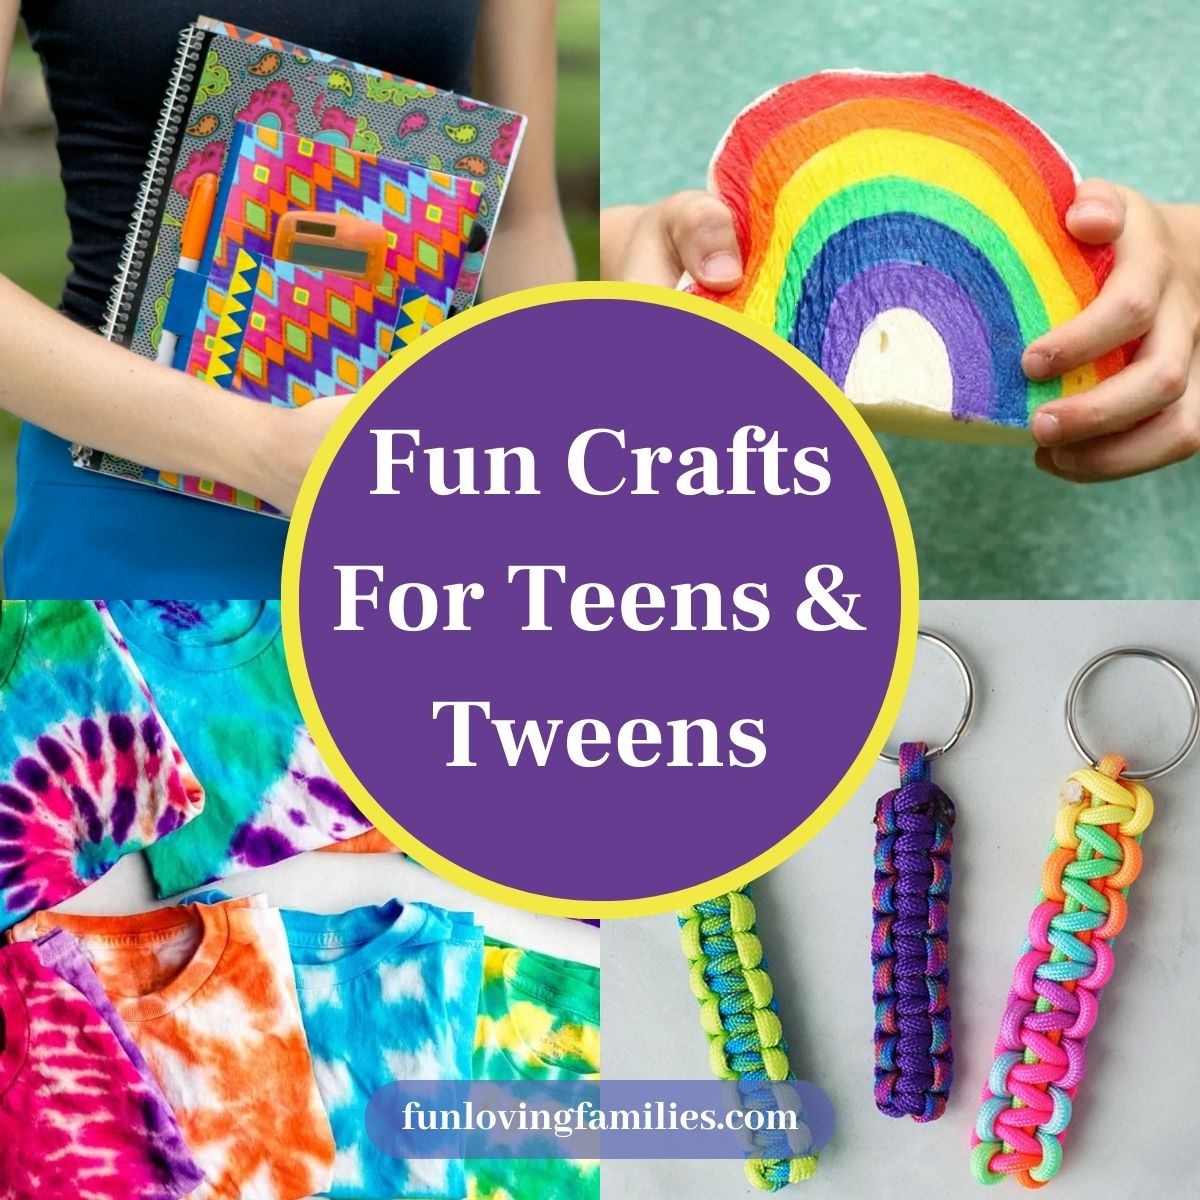 Fun Crafts for Tweens and Teens